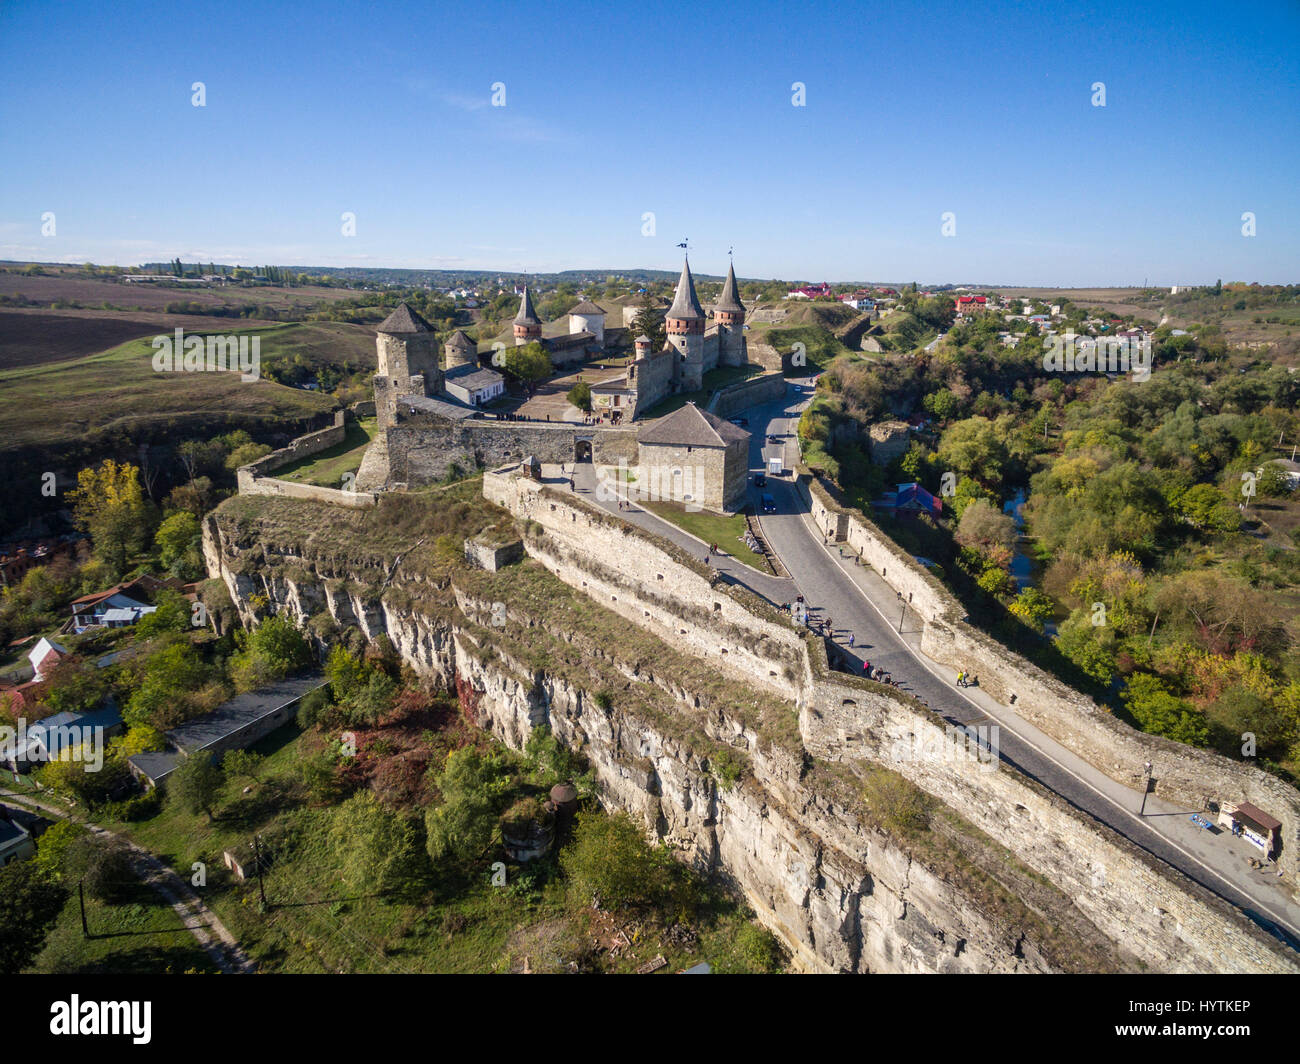 Aerial shot of Kamianets-Podilski castle in Western Ukraine. Taken on a bright clear autumn day with blue skies Stock Photo